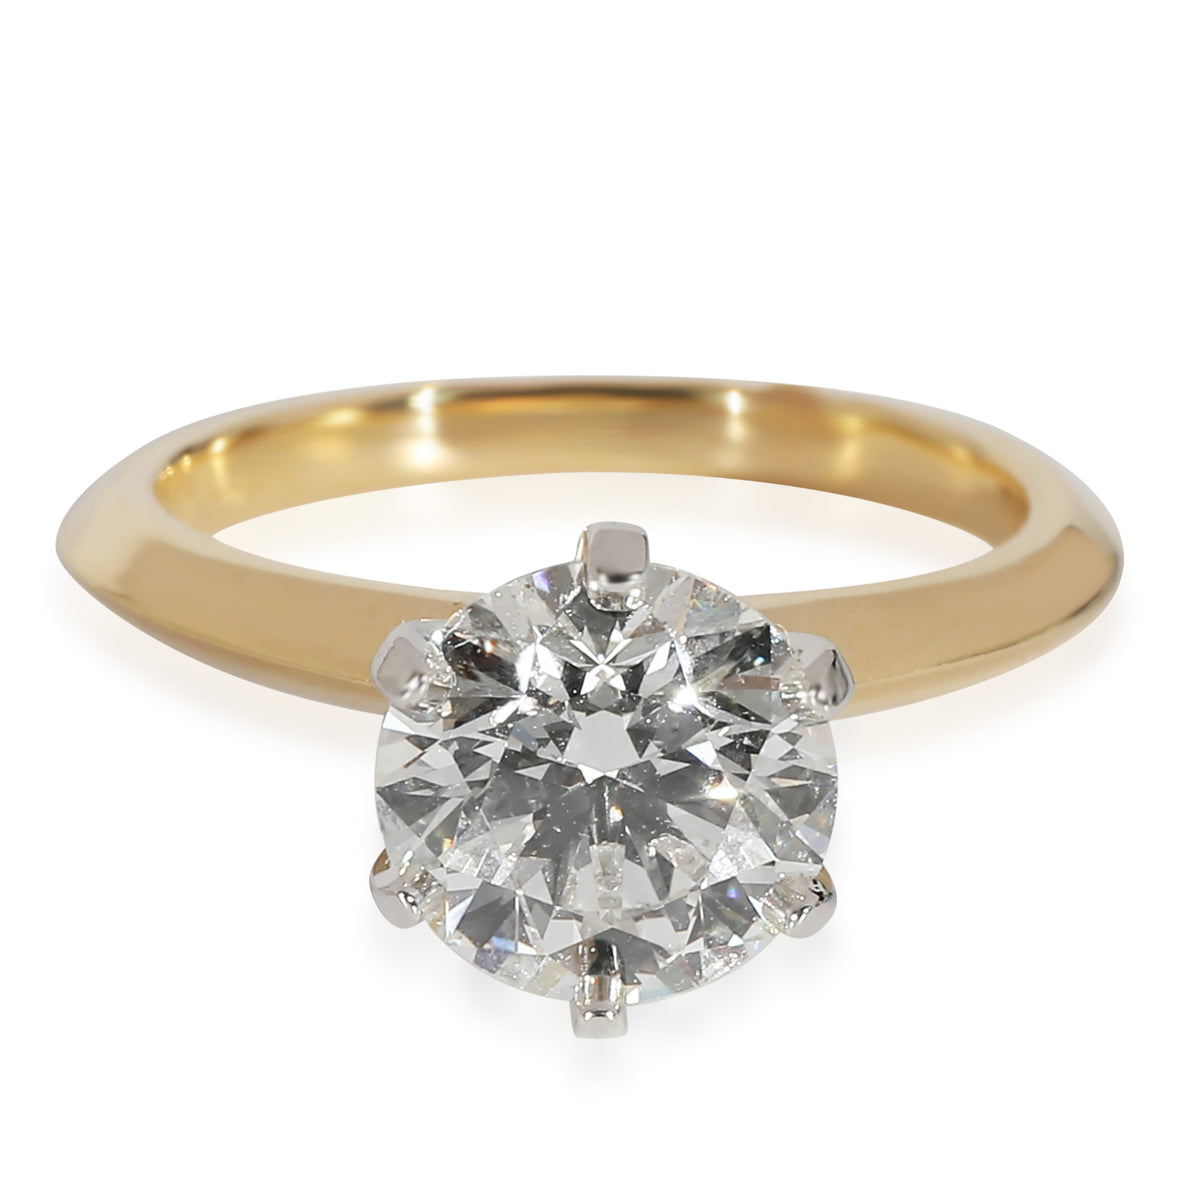 Tiffany & Co. Solitaire Diamond Engagement Ring in 18K Yellow Gold/Plat, 1.69ct